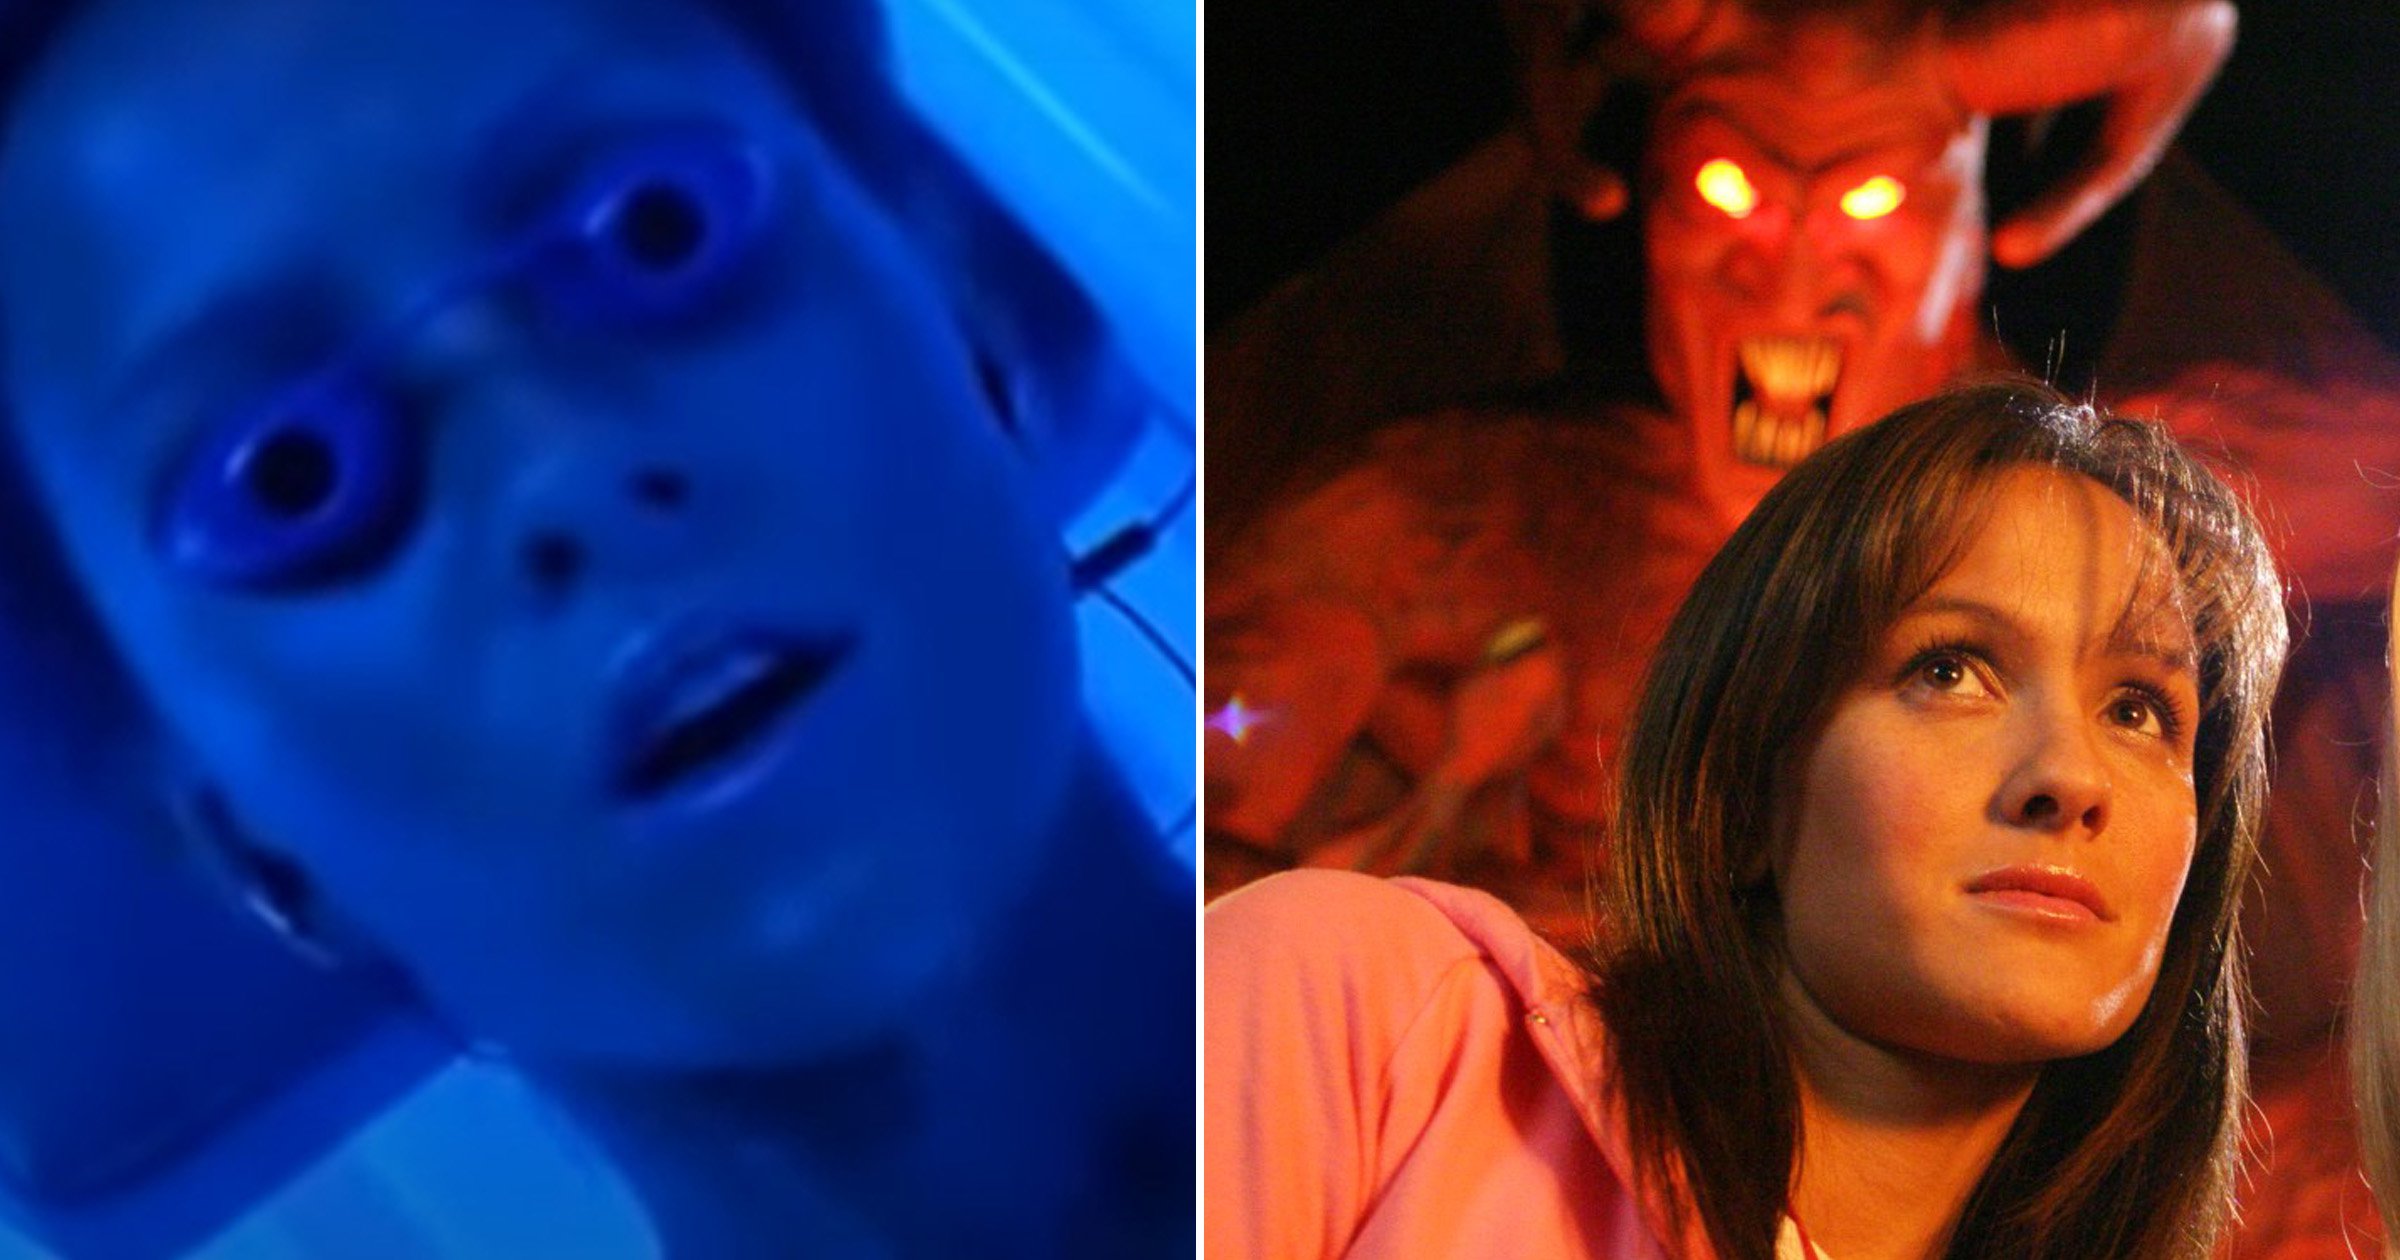 ashley sedgwick recommends final destination 3 tanning bed pic